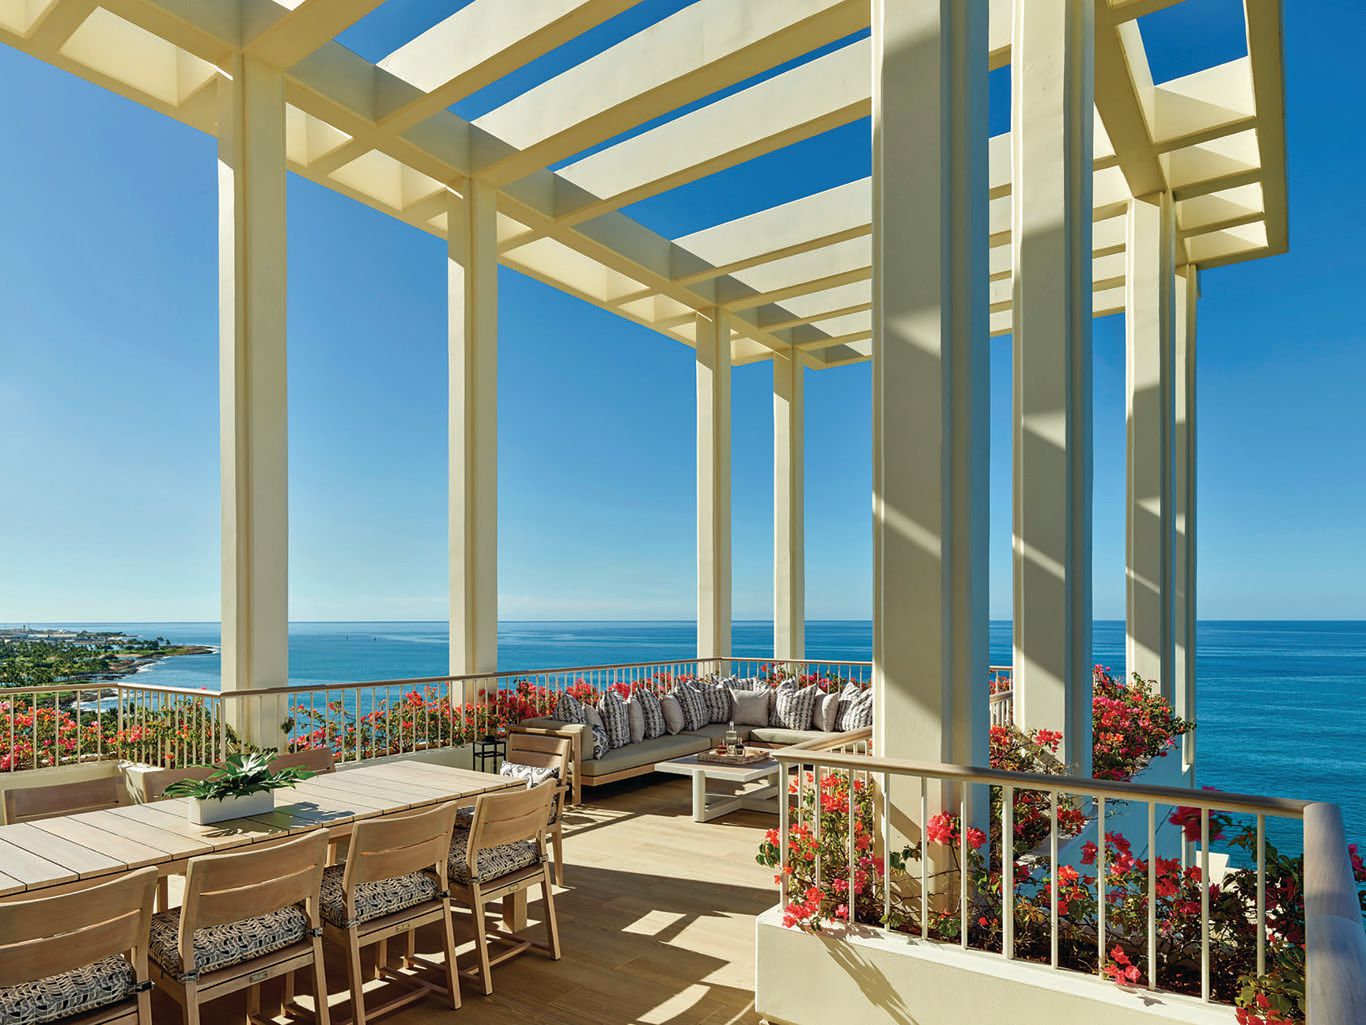 The expansive terrace stuns on the top floor of the resort. PHOTO COURTESY OF FOUR SEASONS RESORT OAHU AT KO OLINA